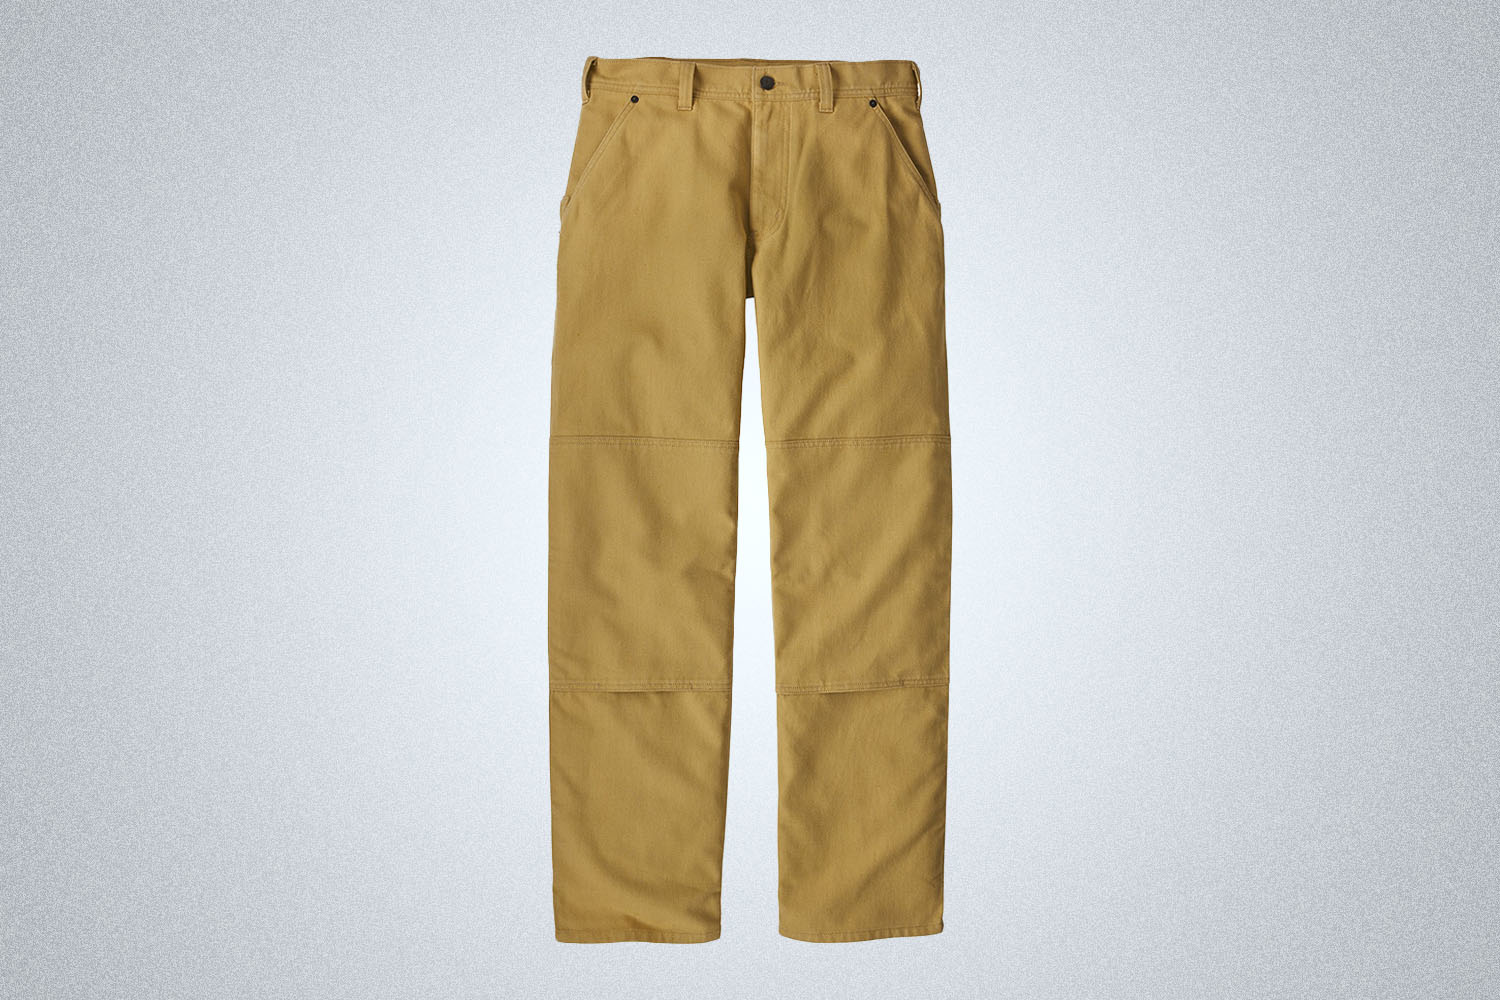 a pari of tan pants on a grey background